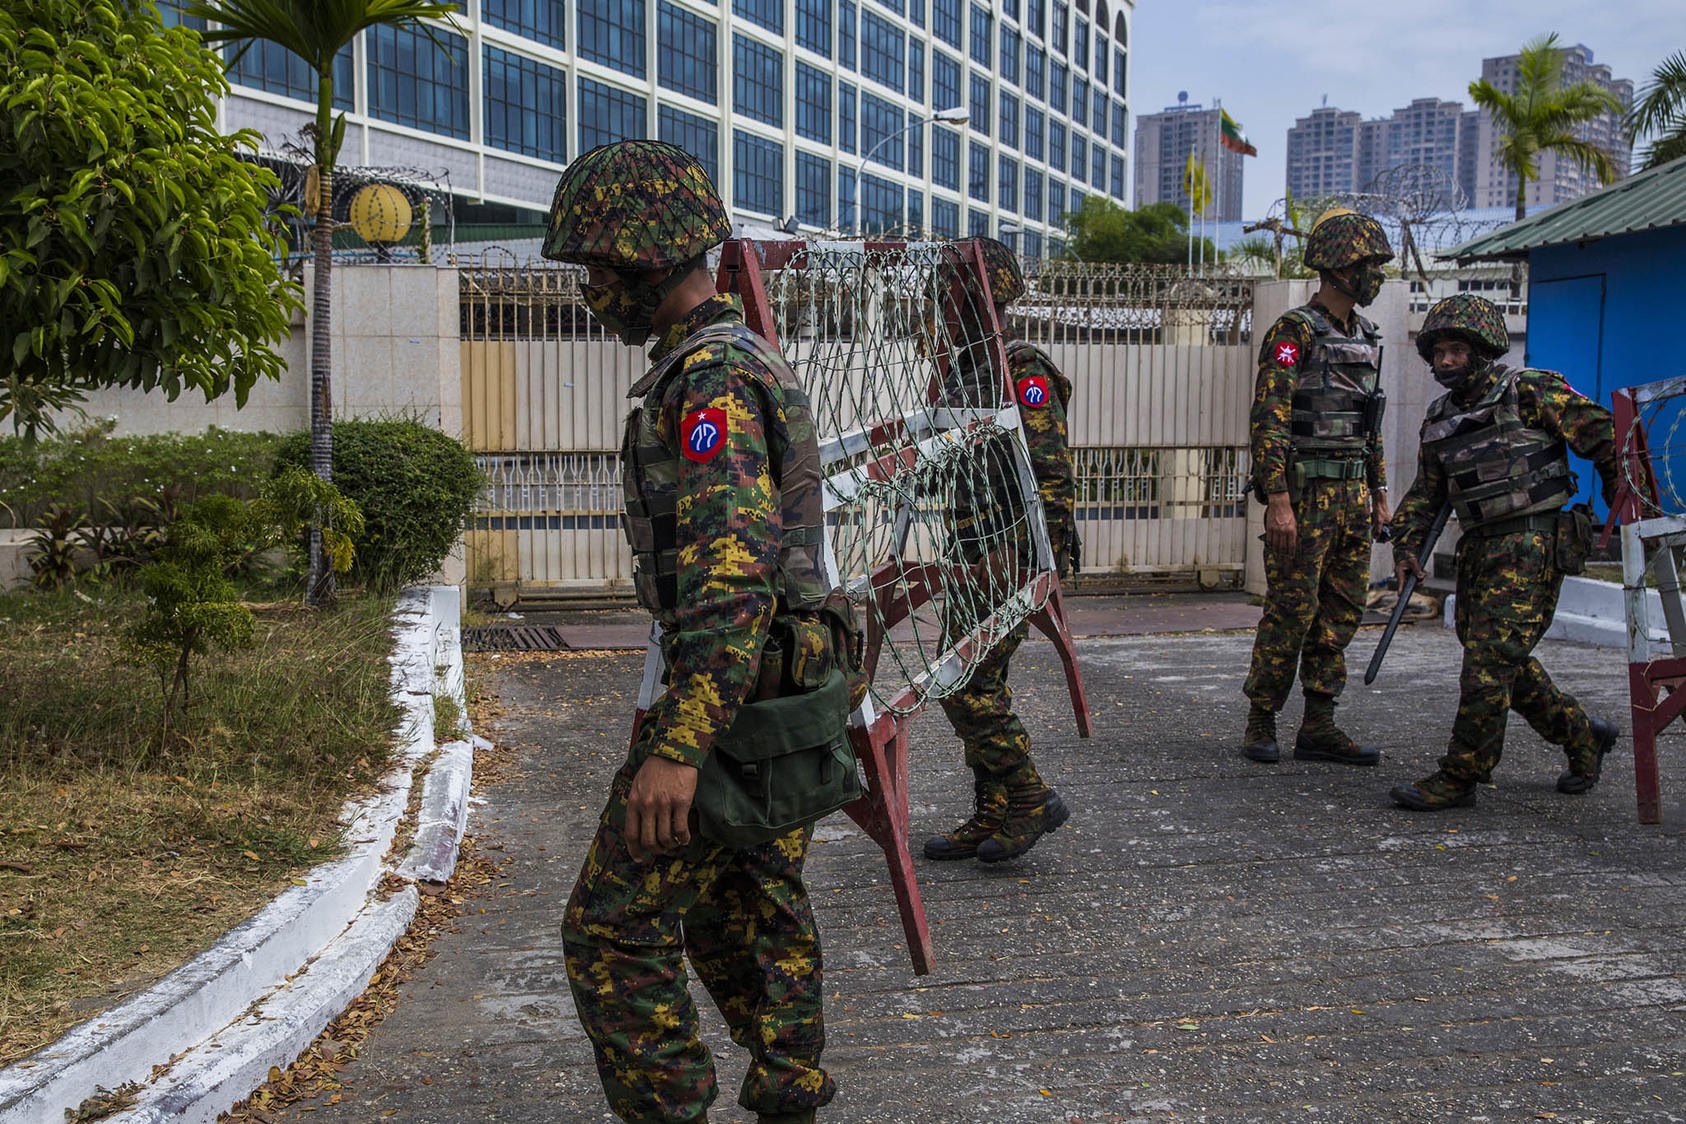 Soldiers set up barricades as tens of thousands of people gathered to protest the coup that ousted the civilian government in Yangon, Myanmar. February 15, 2021. (The New York Times)